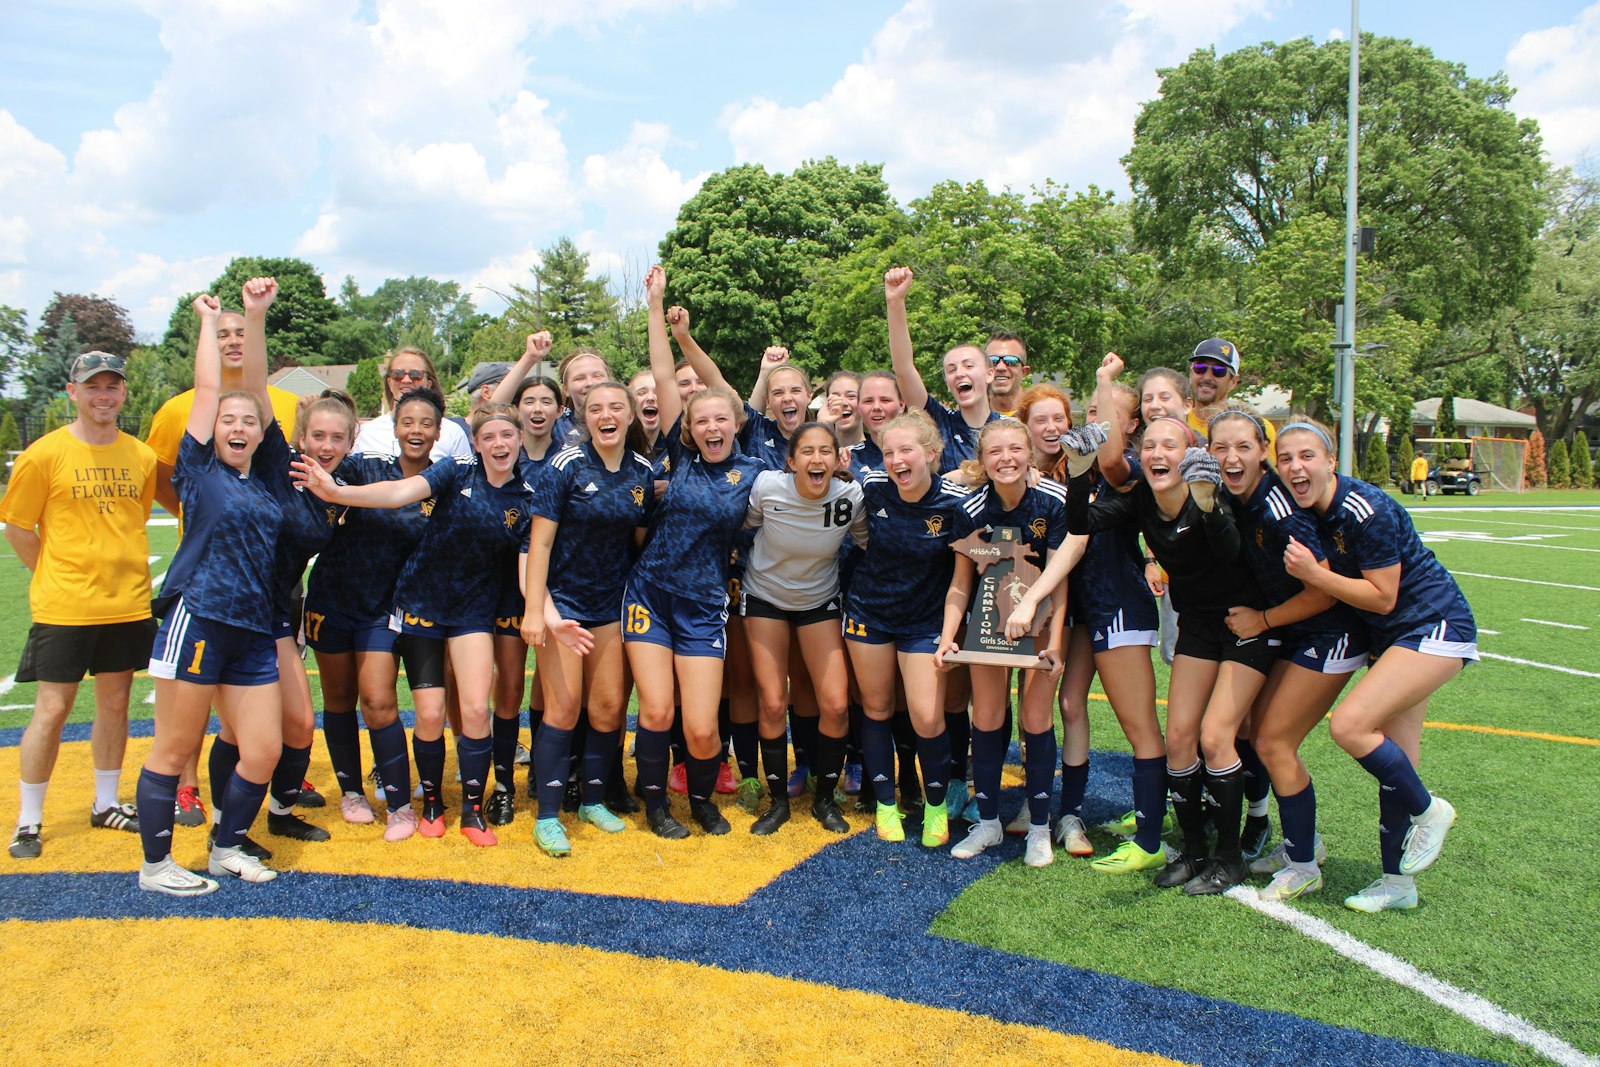 Royal Oak Shrine won its third straight regional title in girls’ soccer – and the third in program history. Next, the Lady Knights face Bad Axe in the state semifinals, on Tuesday night at Troy High School.